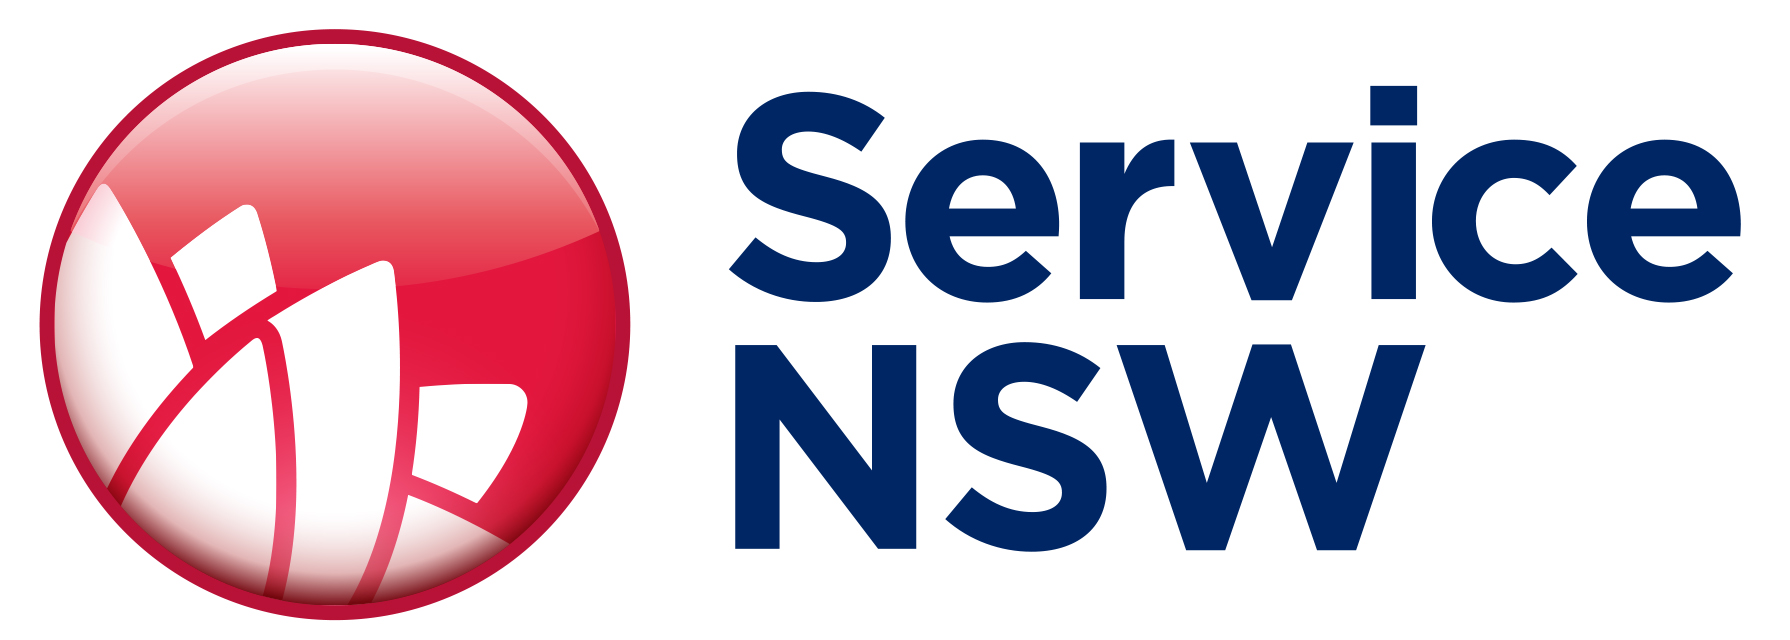 Service NSW Coolah Agency is now open at 59 Binnia Street Coolah Monday, Wednesday and Friday